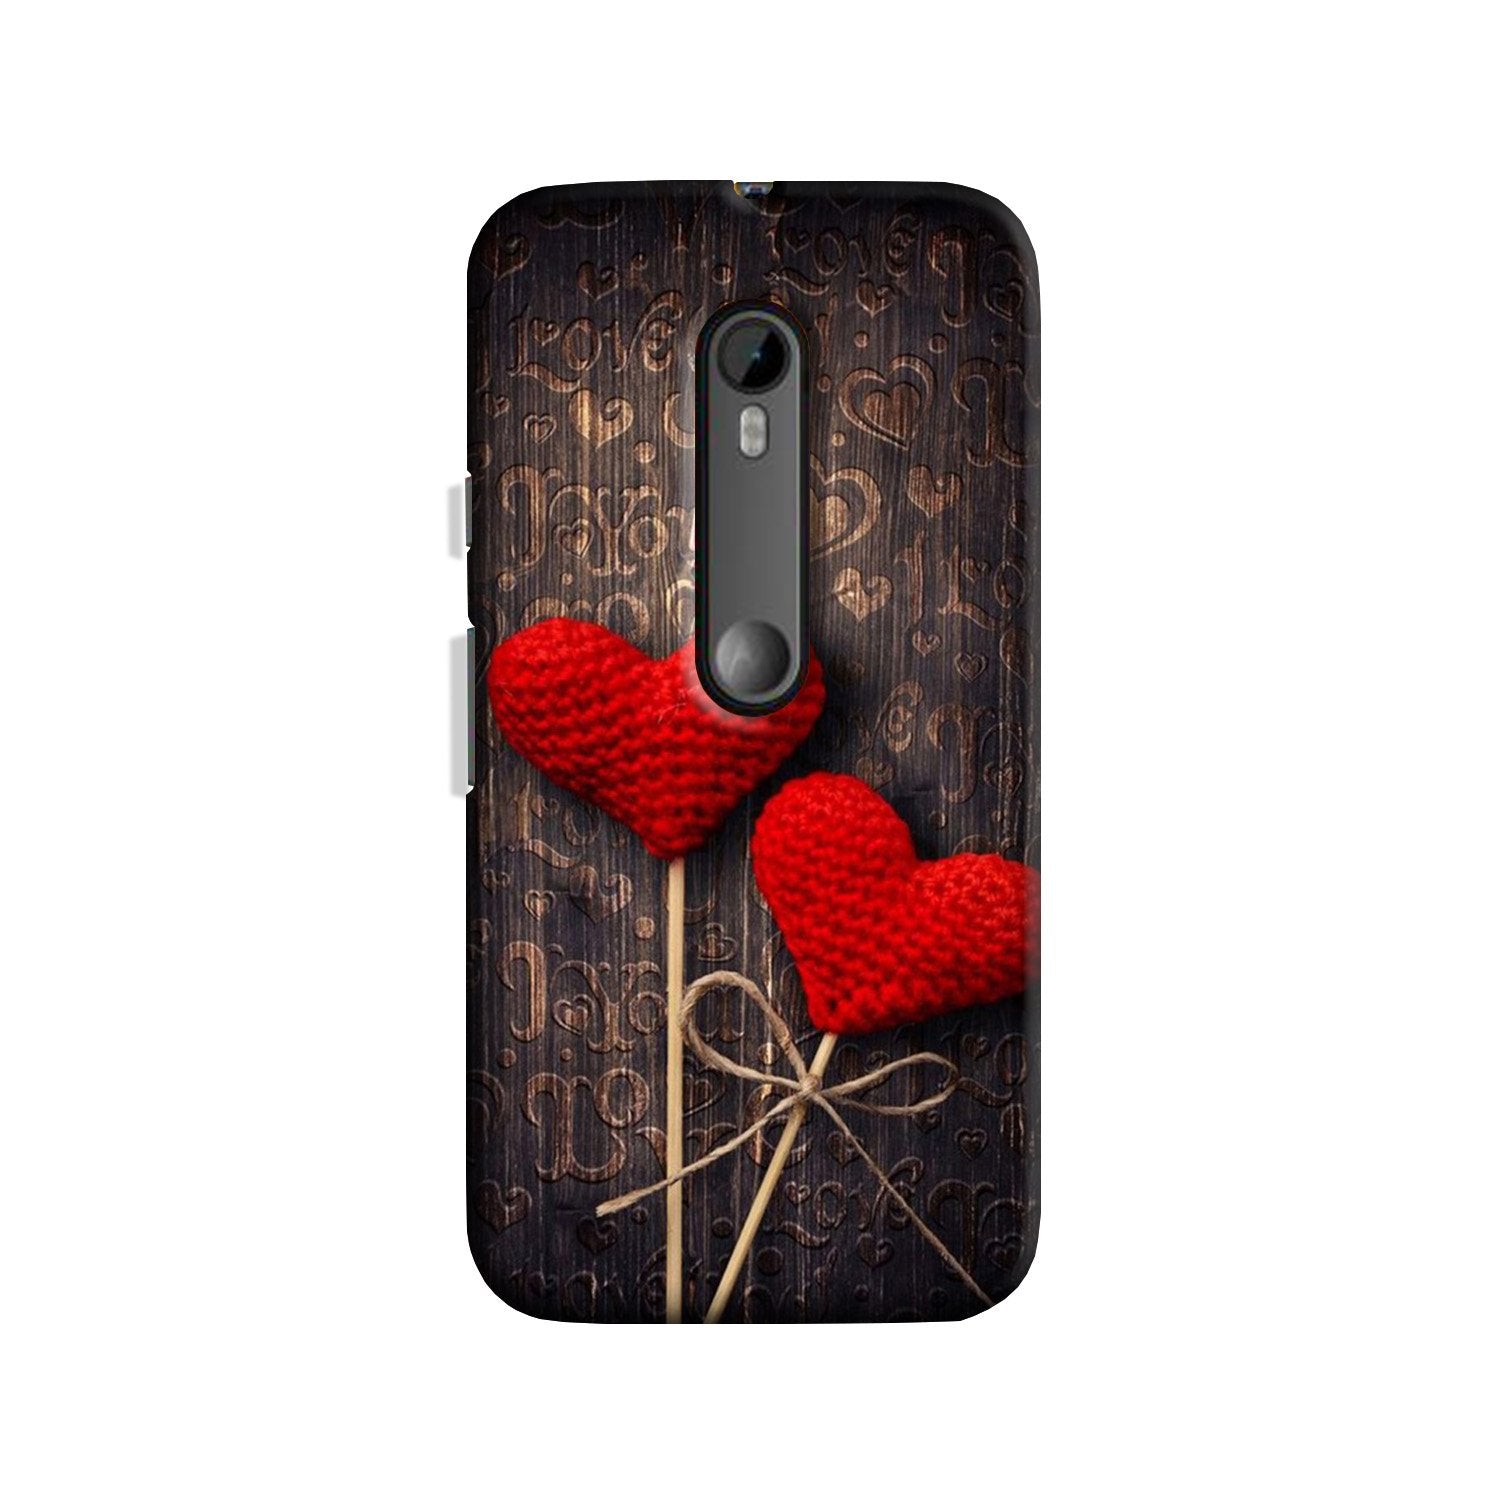 Red Hearts Case for Moto X Force